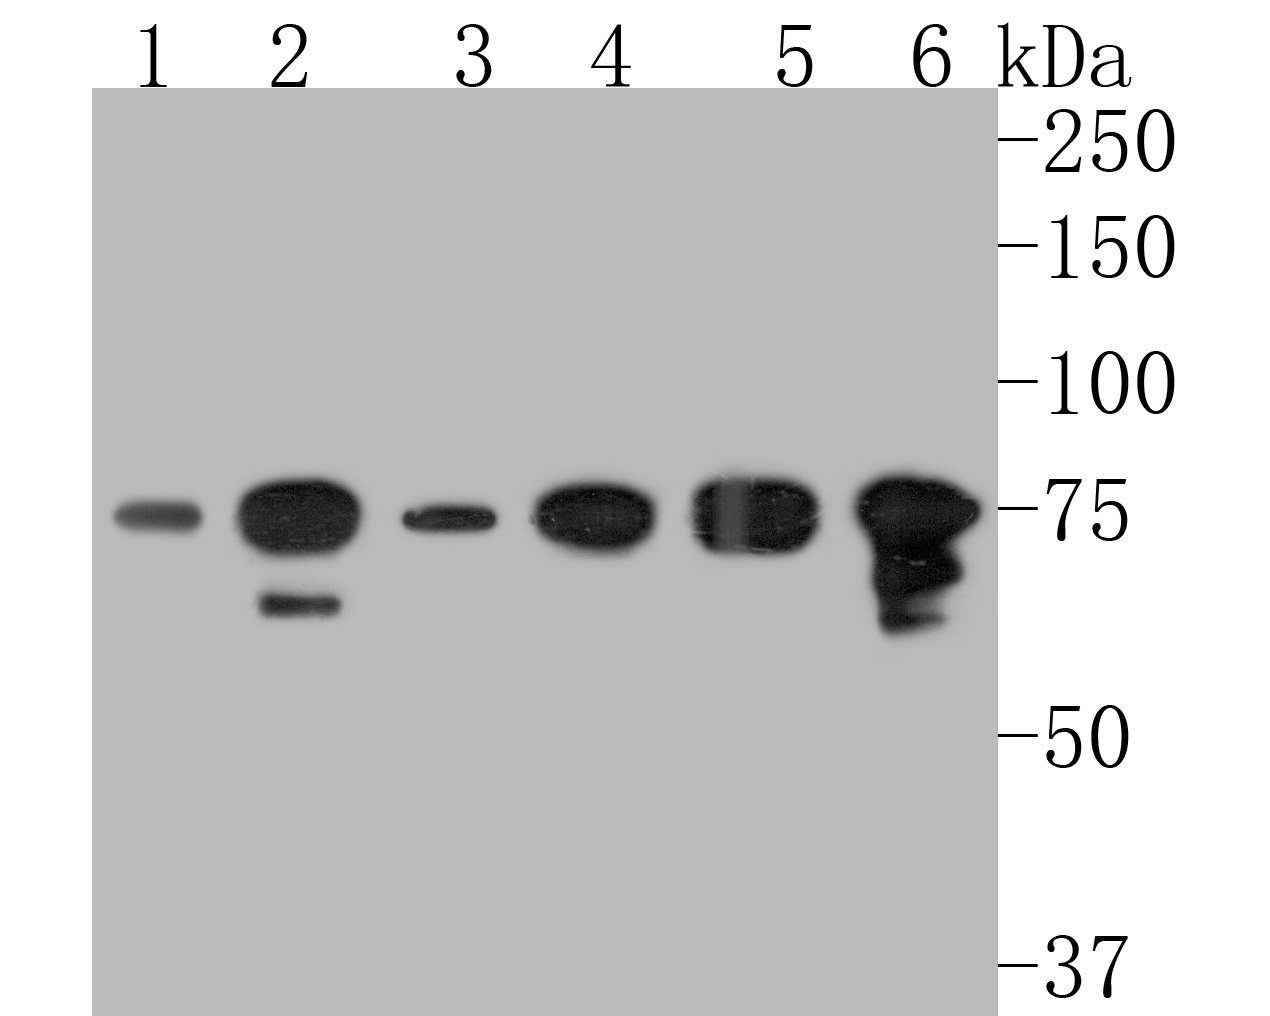 Western blot analysis of DDX3 on different lysates. Proteins were transferred to a PVDF membrane and blocked with 5% BSA in PBS for 1 hour at room temperature. The primary antibody (HA500093, 1/500) was used in 5% BSA at room temperature for 2 hours. Goat Anti-Rabbit IgG - HRP Secondary Antibody (HA1001) at 1:5,000 dilution was used for 1 hour at room temperature.<br />
Positive control: <br />
Lane 1: NIH/3T3 cell lysate<br />
Lane 2: K562 cell lysate<br />
Lane 3: A431 cell lysate<br />
Lane 4: HepG2 cell lysate<br />
Lane 5: Jurkat cell lysate<br />
Lane 6: Rat testis tissue lysate